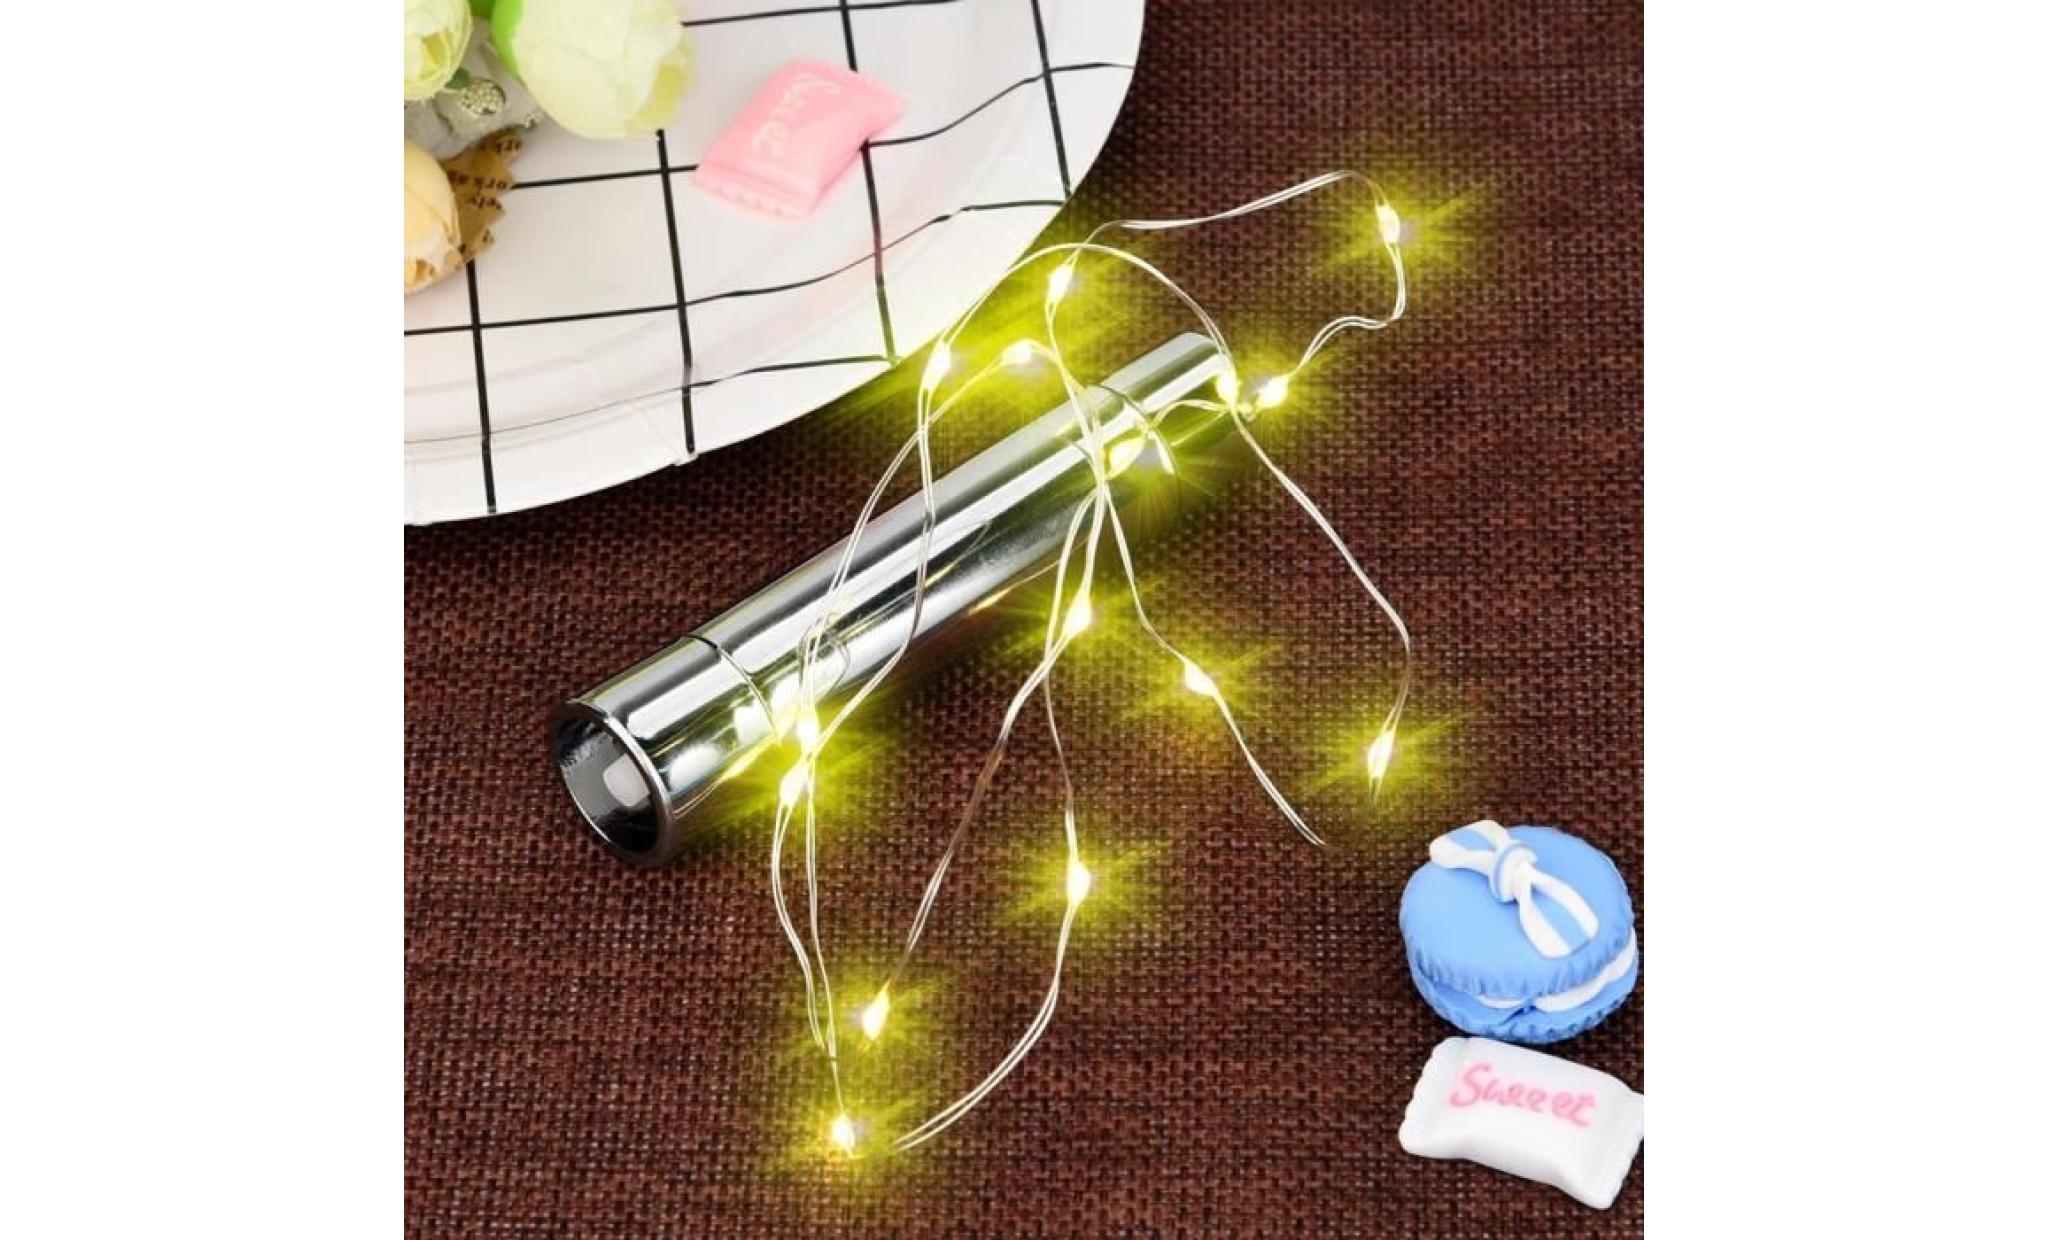 20 led bright colorful bottle light kit fairy lights battery top wedding decorat pageare1612 pageare1612